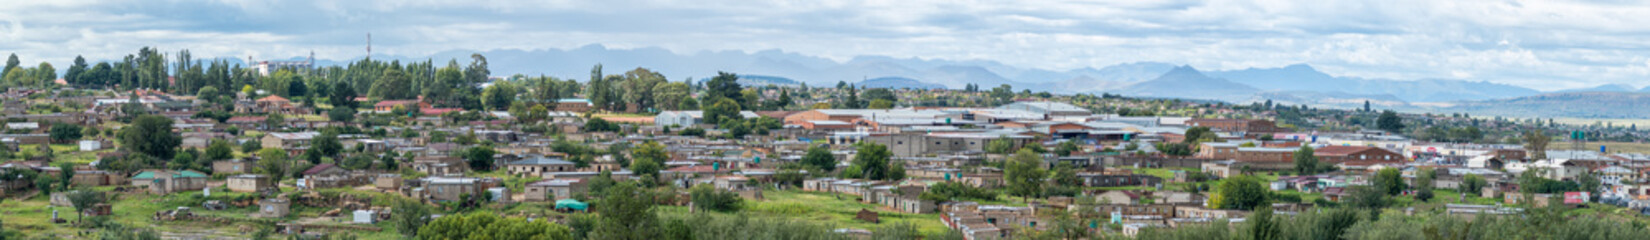 Panorama of Maputsoe in Lesotho seen from Ficksburg, South Africa